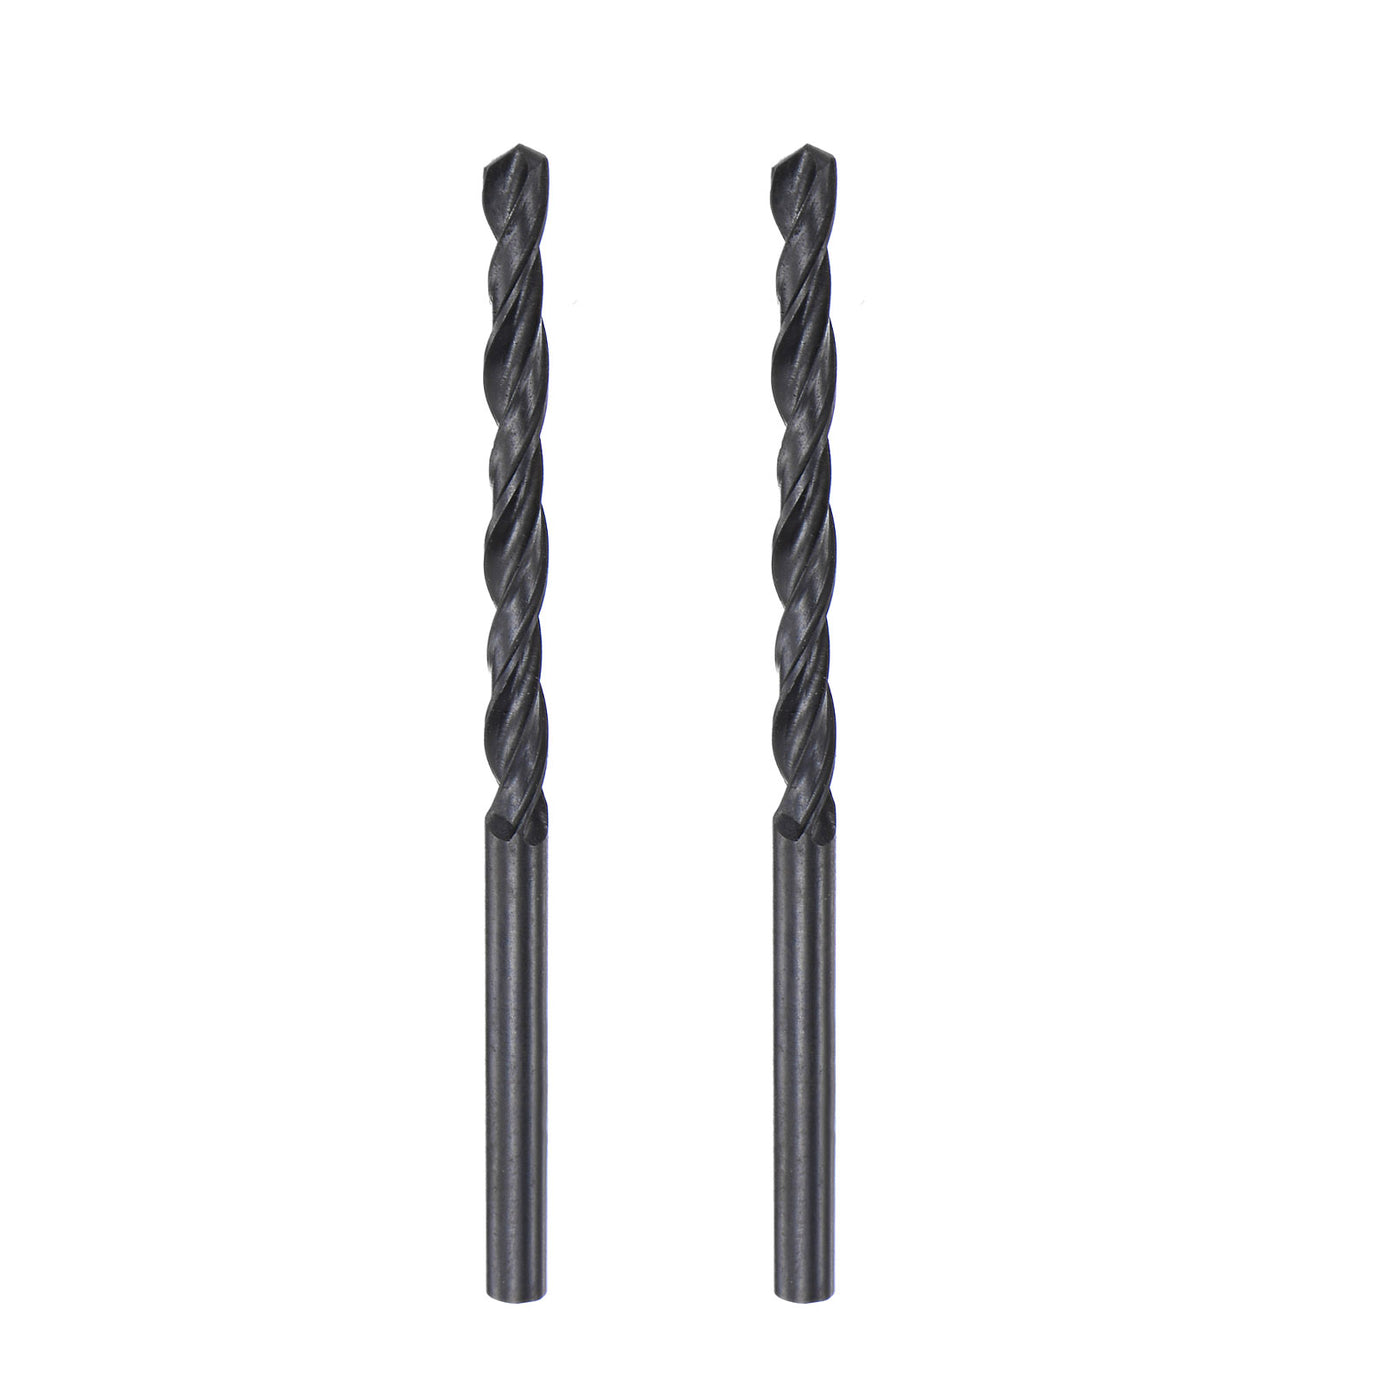 uxcell Uxcell High Speed Steel Twist Drill Bit, 3.6mm Fully Ground Black Oxide 68mm Long 2Pcs